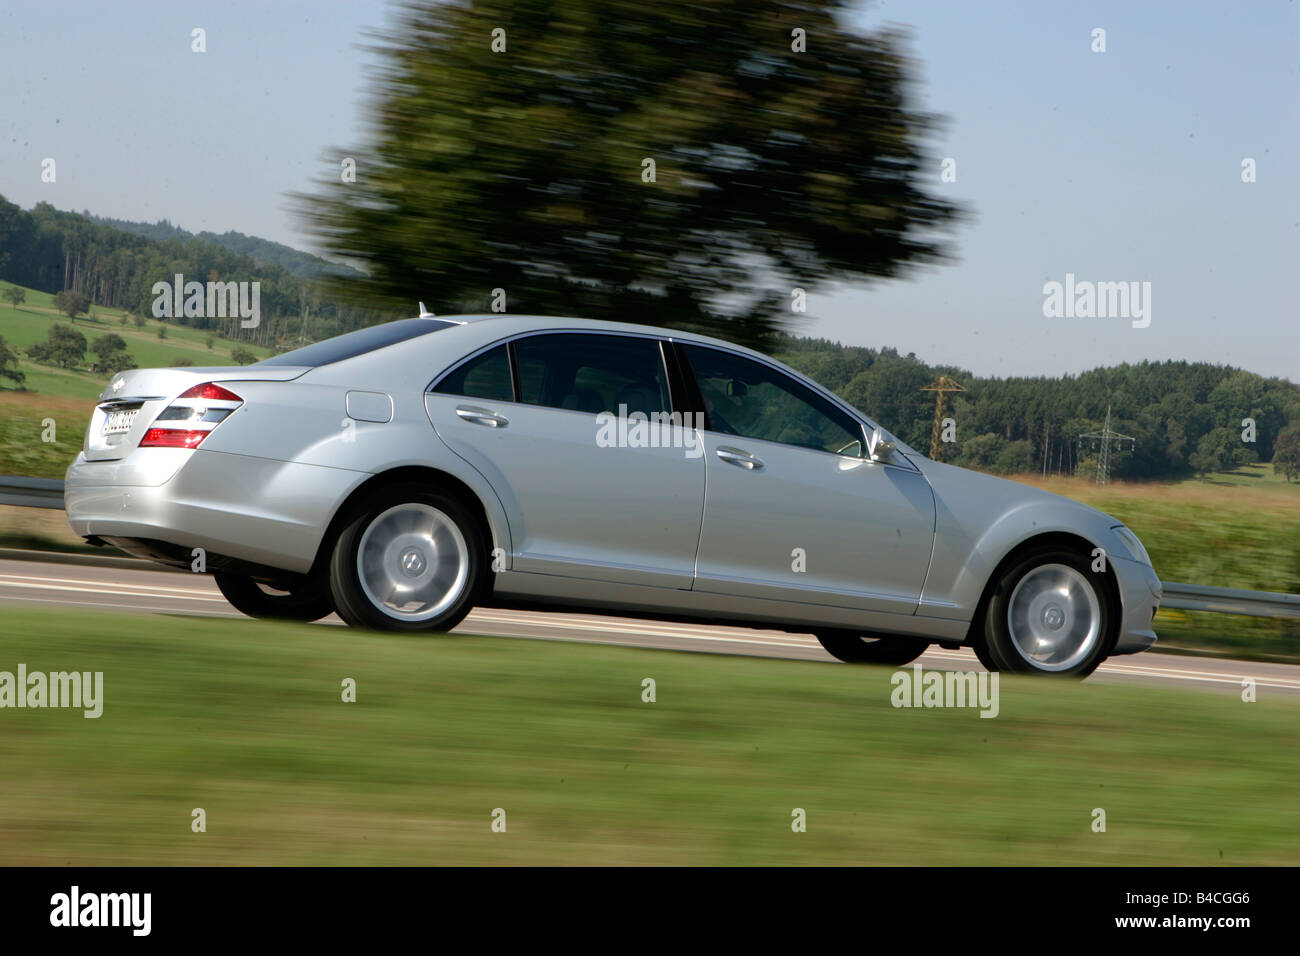 Car Mercedes S 500 Model Year 05 Silver Limousine Luxury Stock Photo Alamy